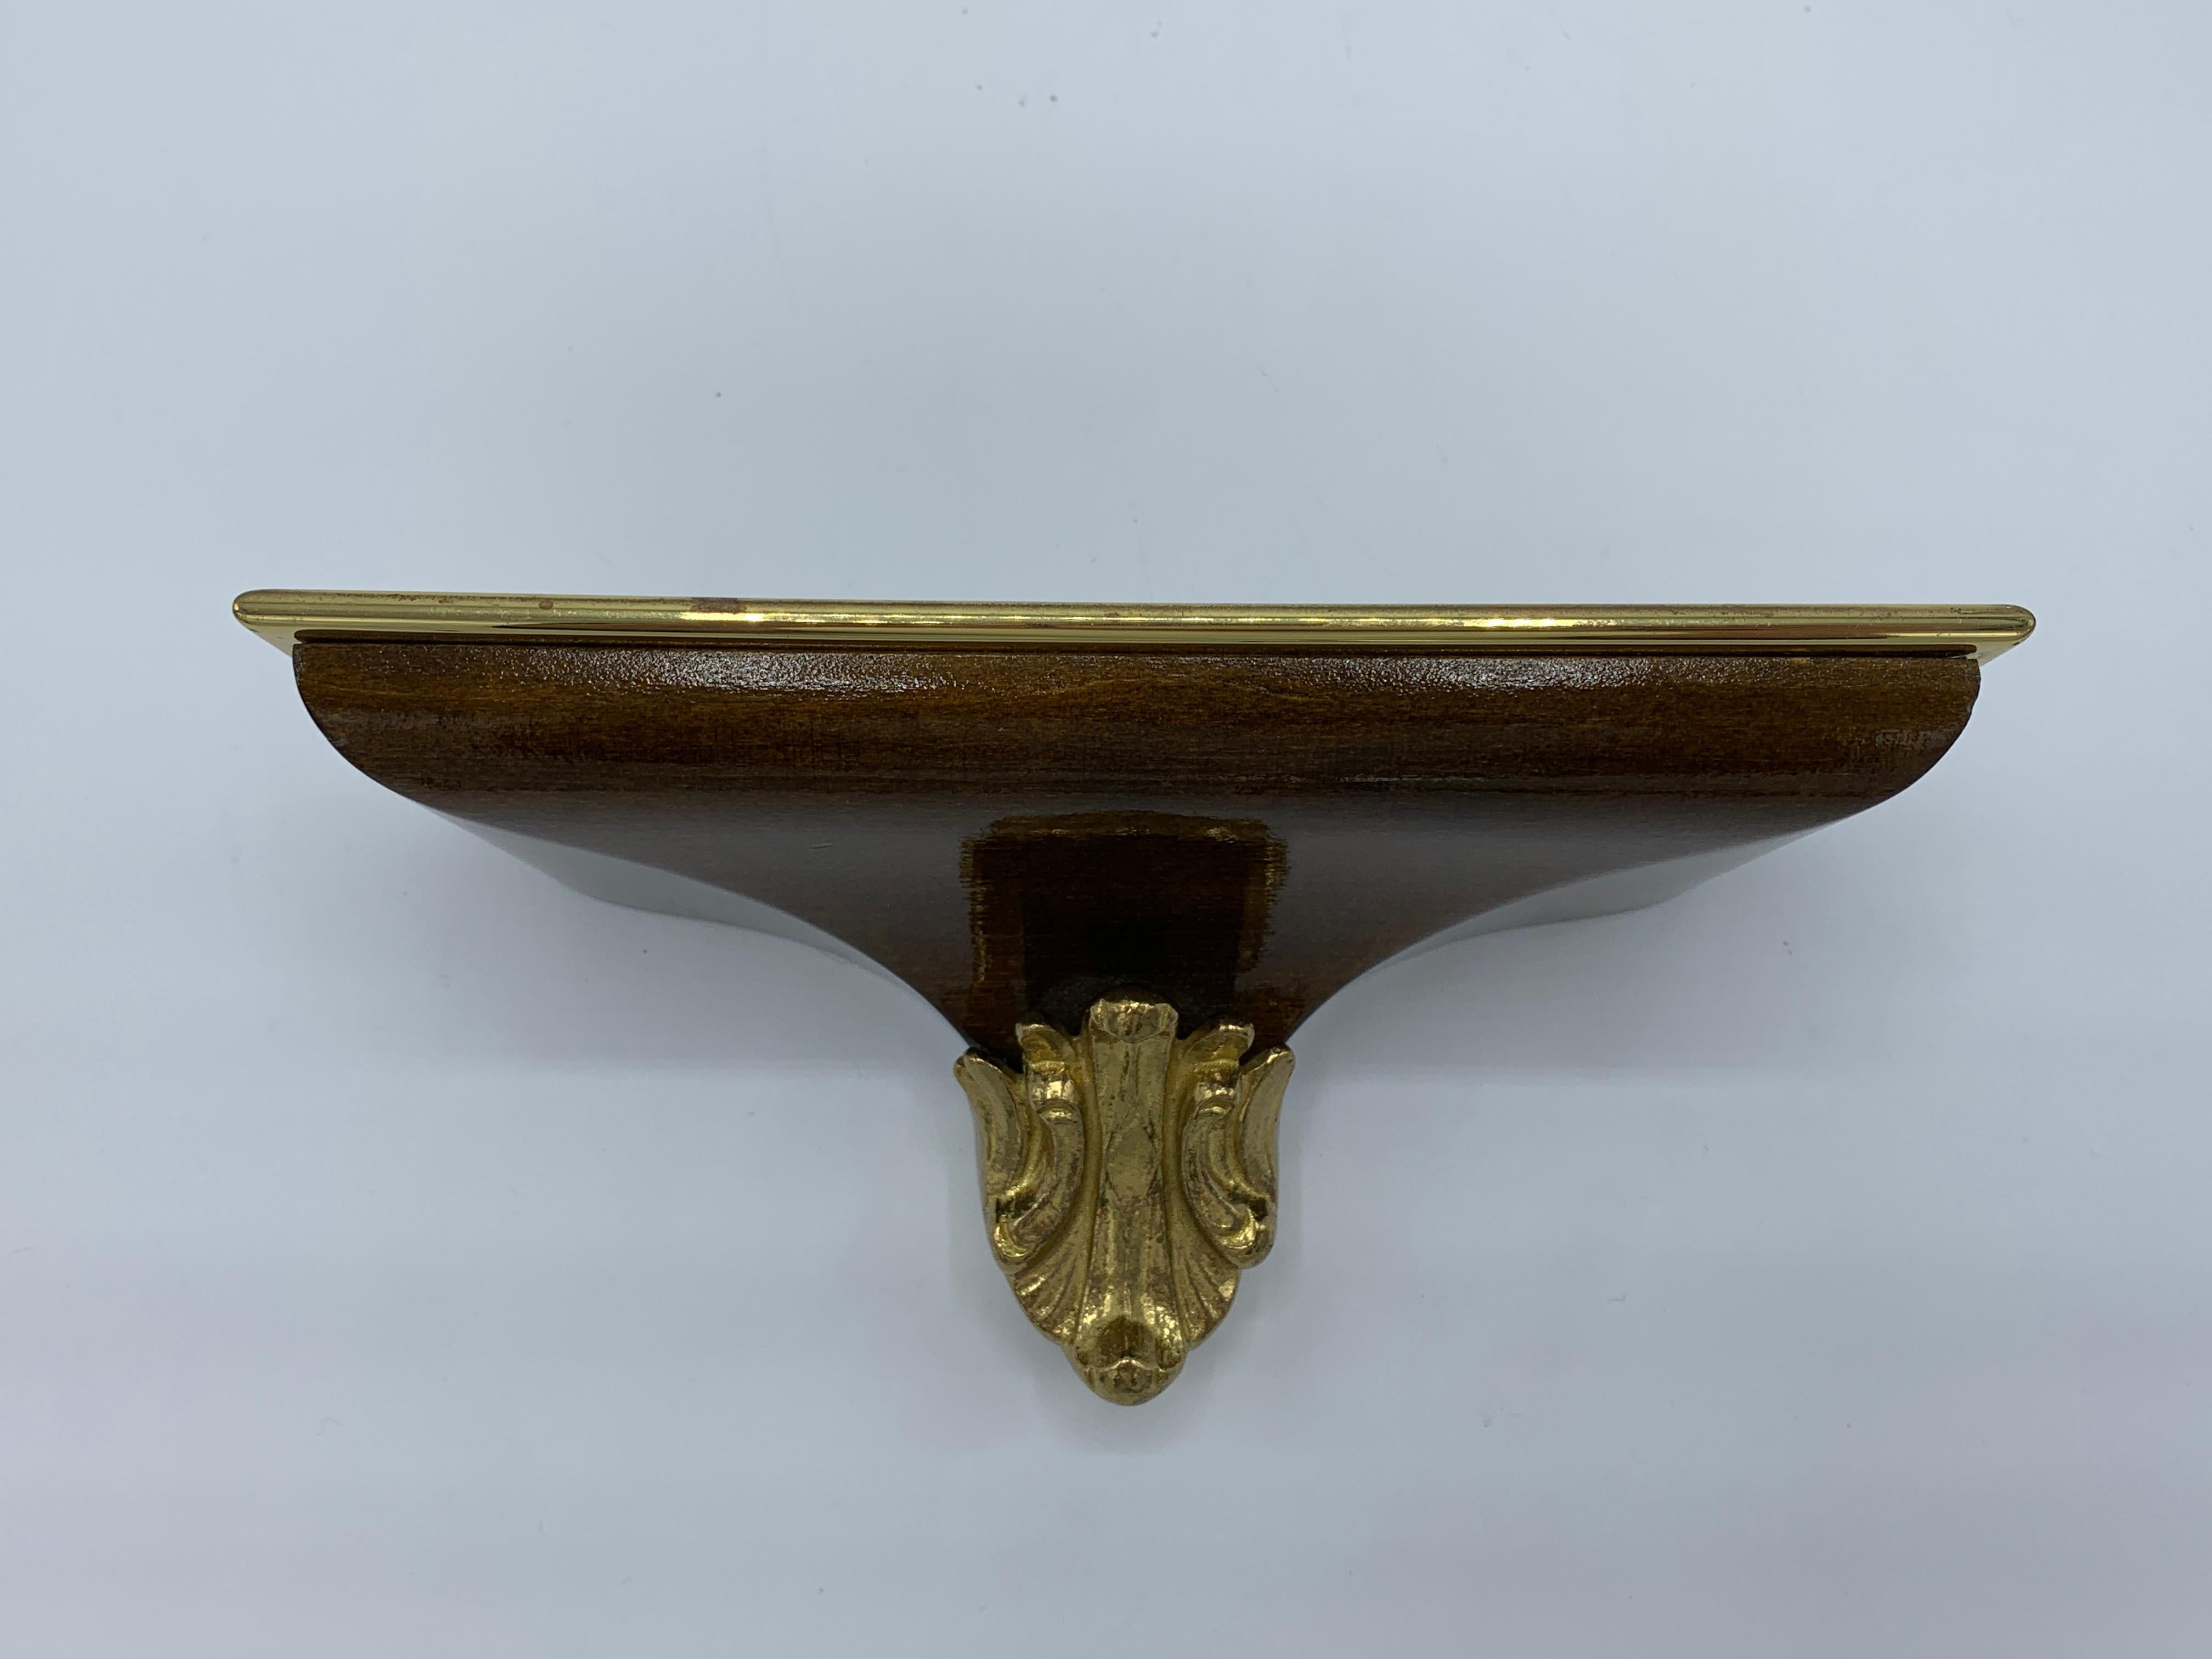 Listed is a stunning, 1970s polished-brass and walnut wall bracket shelf. The piece is small, but has a large presence with it’s scale. Heavy, weighing 1.5lbs.